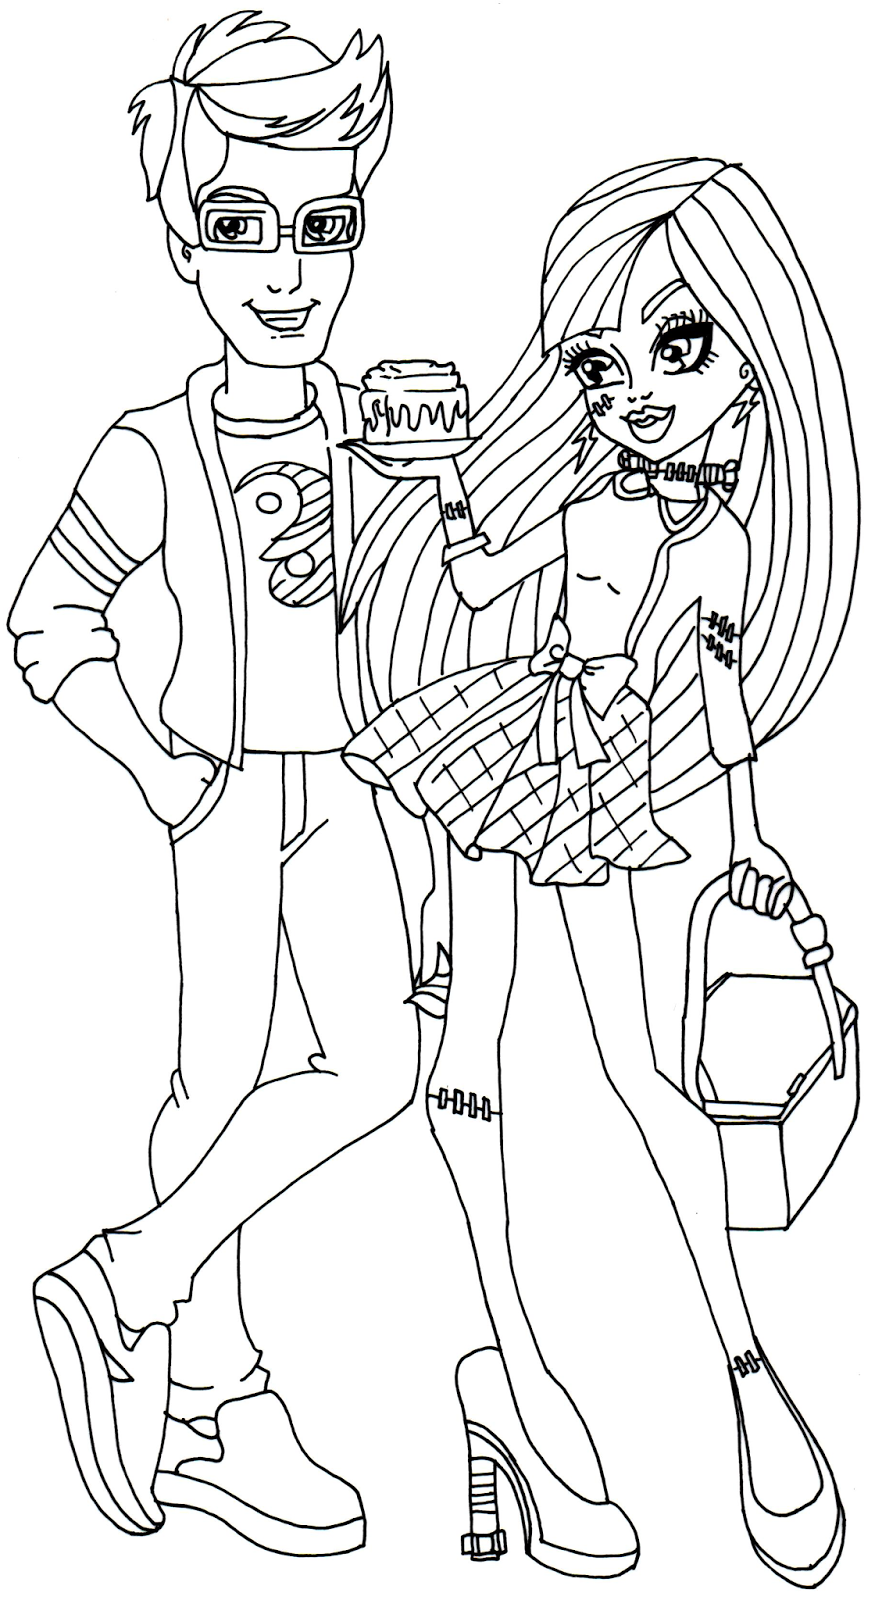 Free Printable Monster High Coloring Pages: February 2014